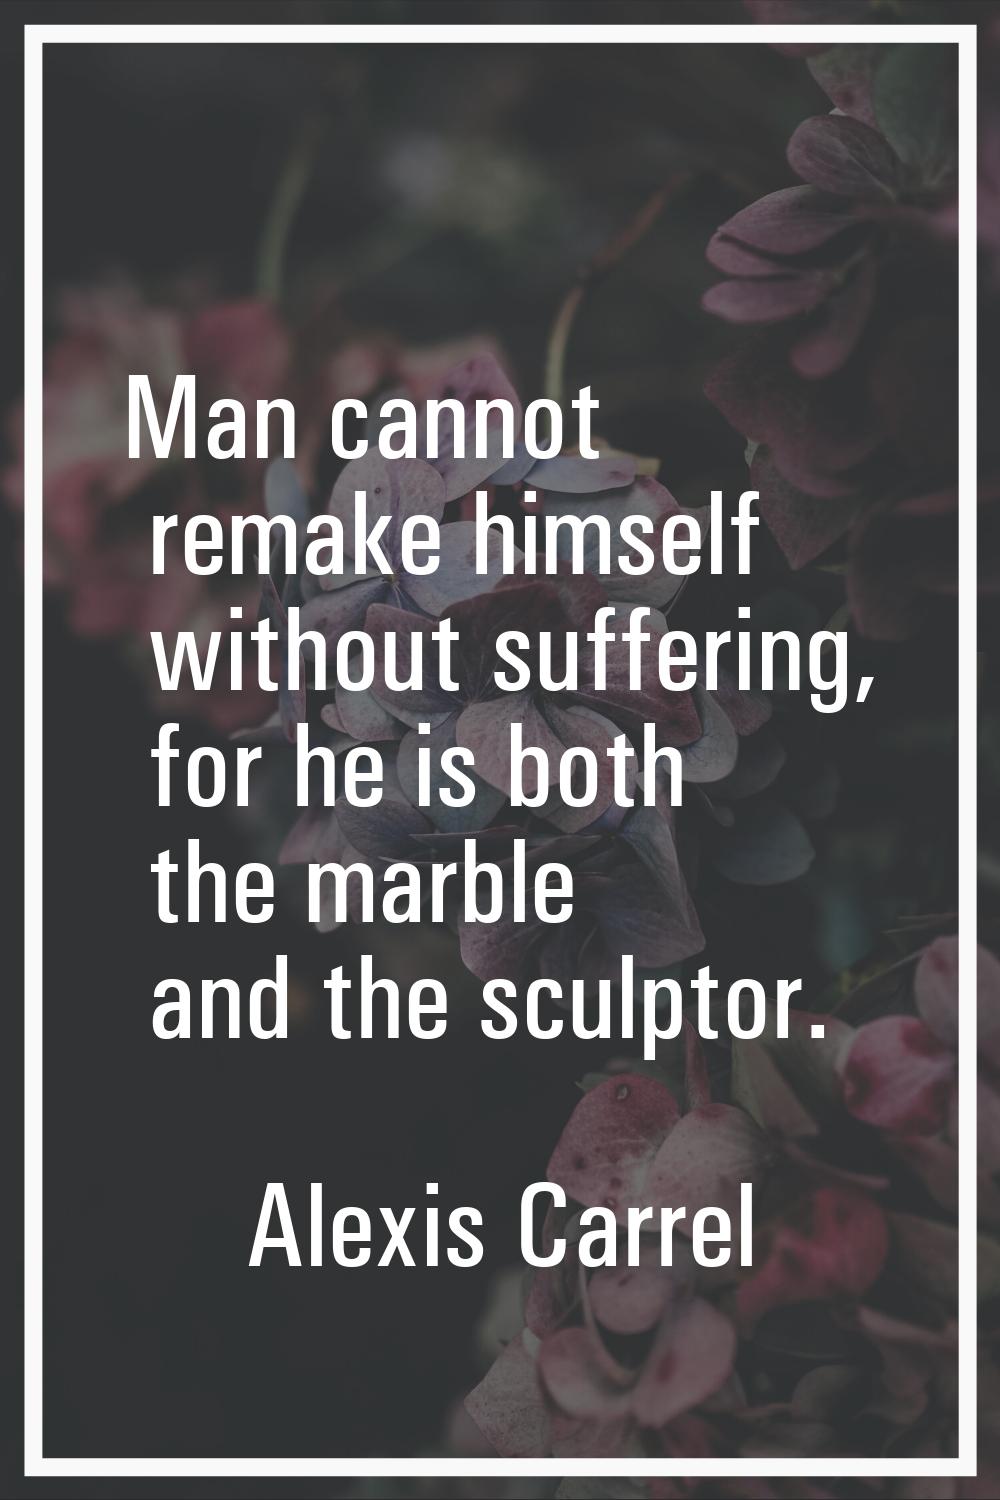 Man cannot remake himself without suffering, for he is both the marble and the sculptor.